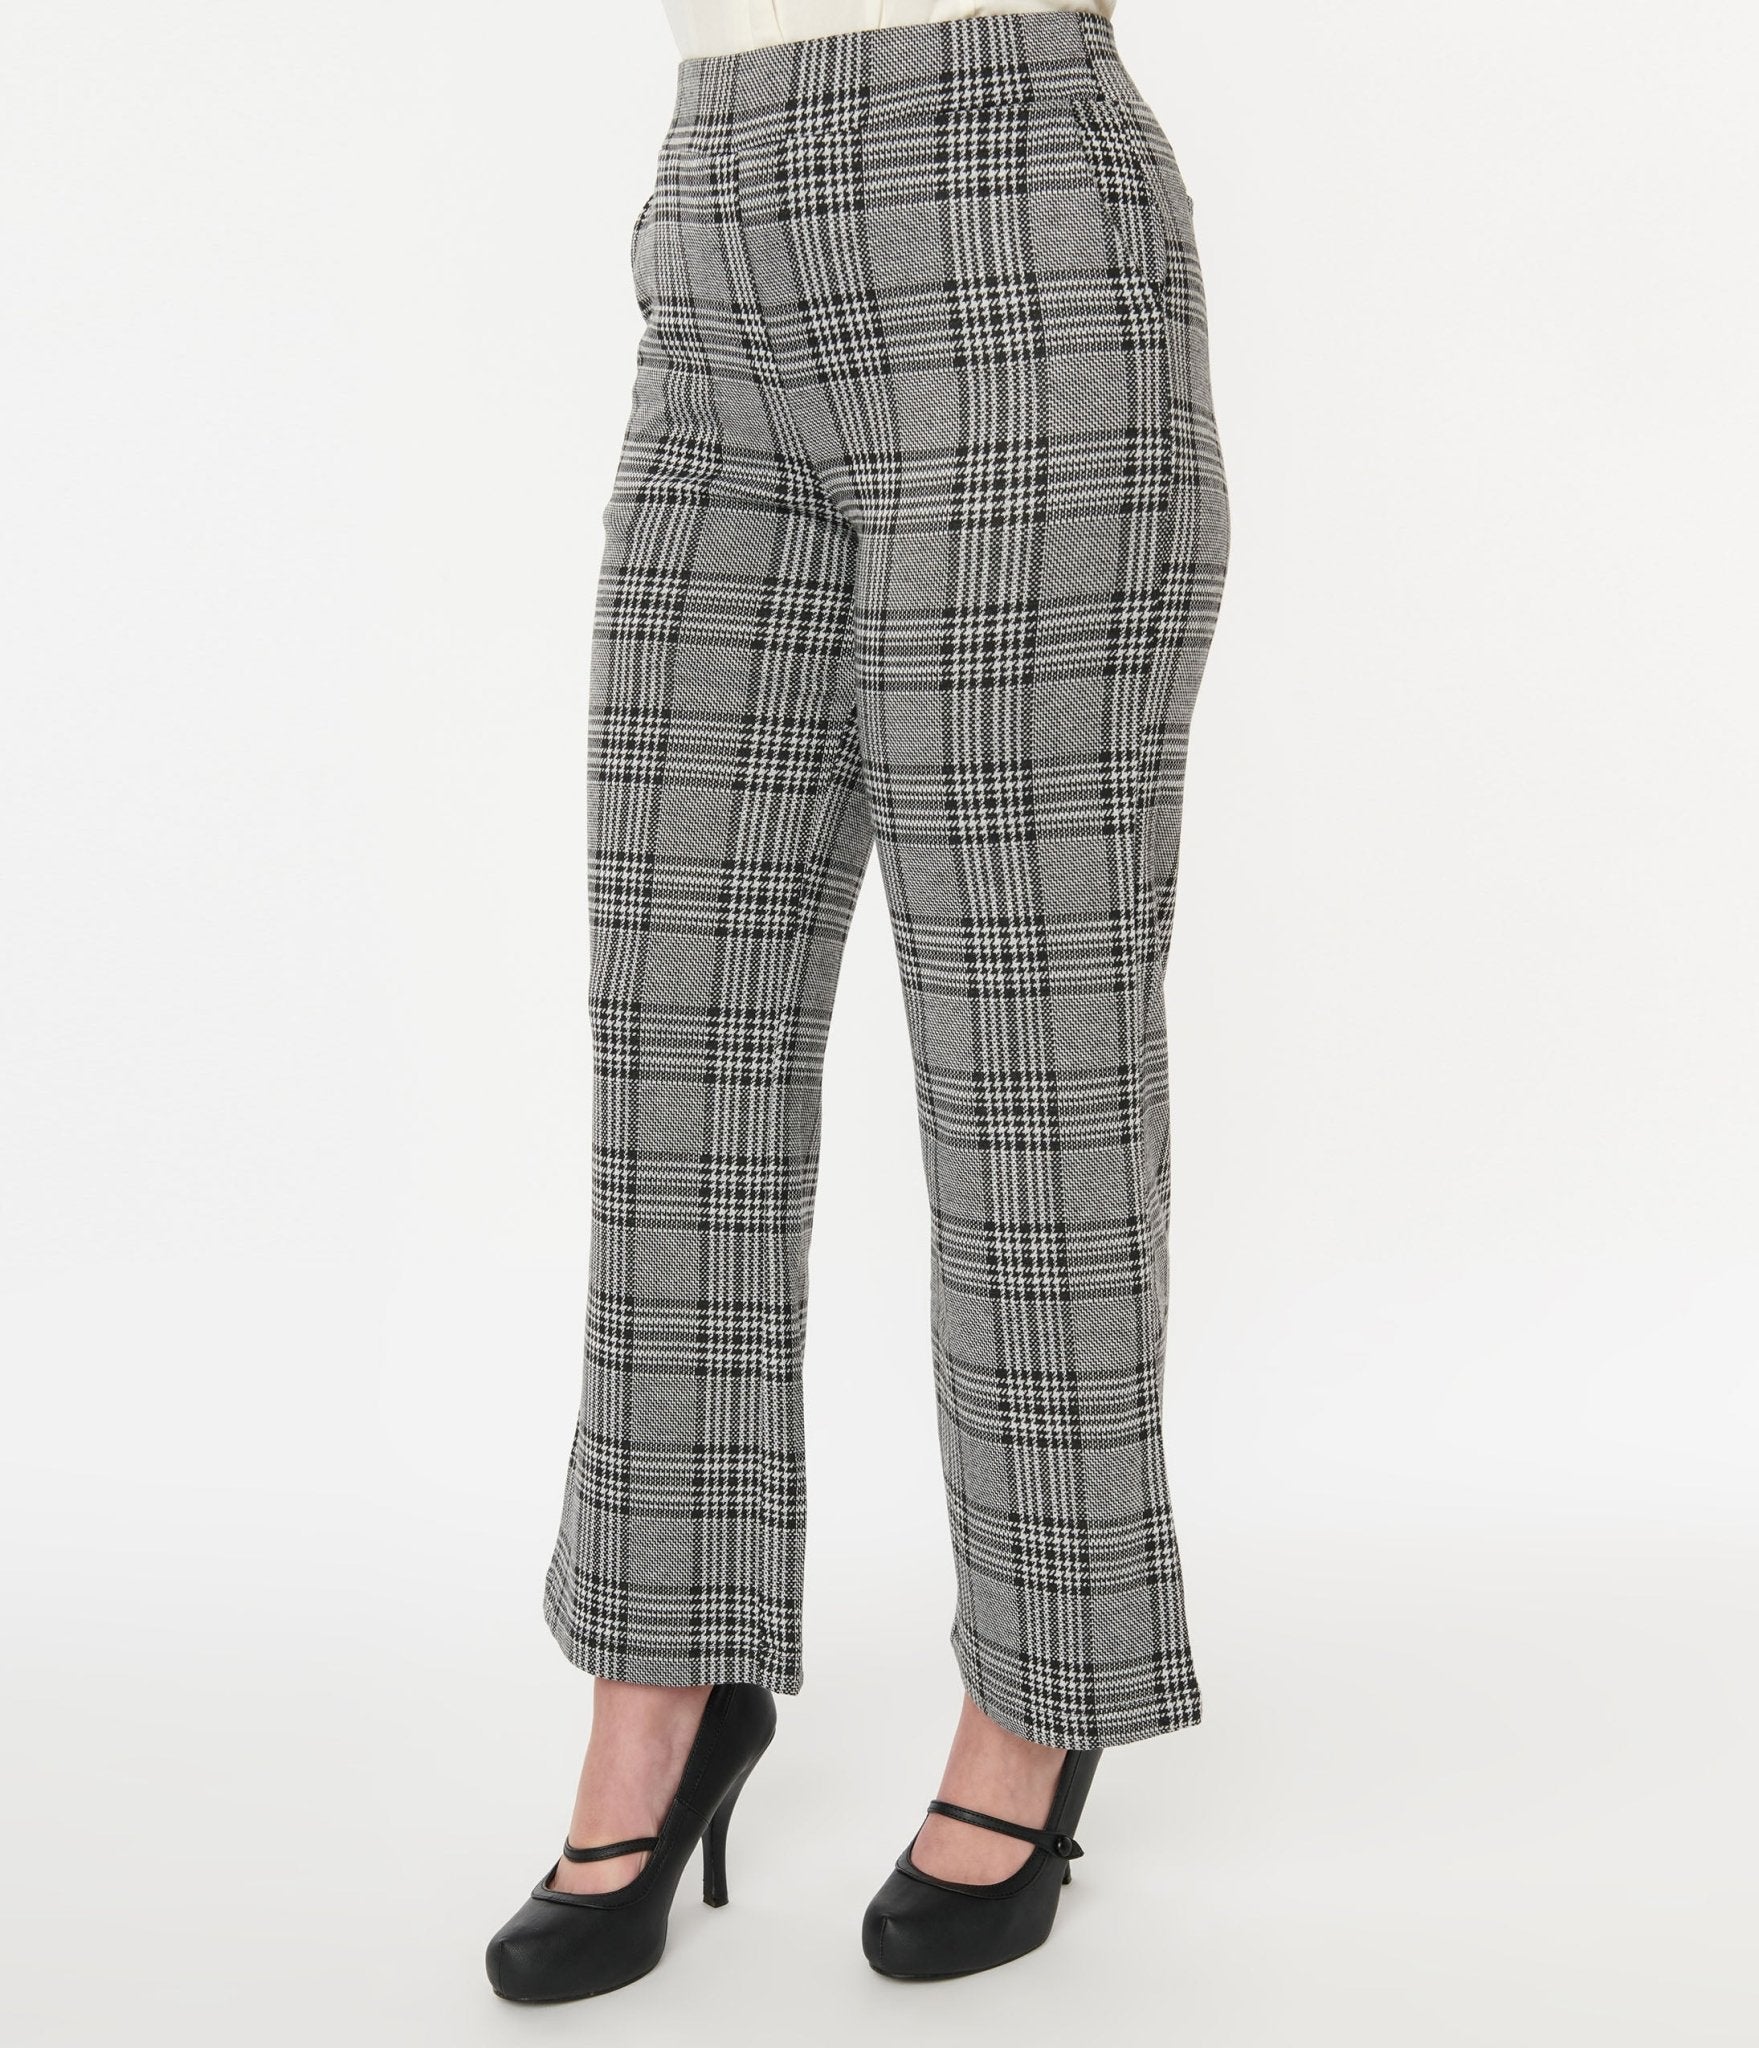 Grey Plaid Pants Spring Outfits For Women In Their 20s (3 ideas & outfits)  | Lookastic